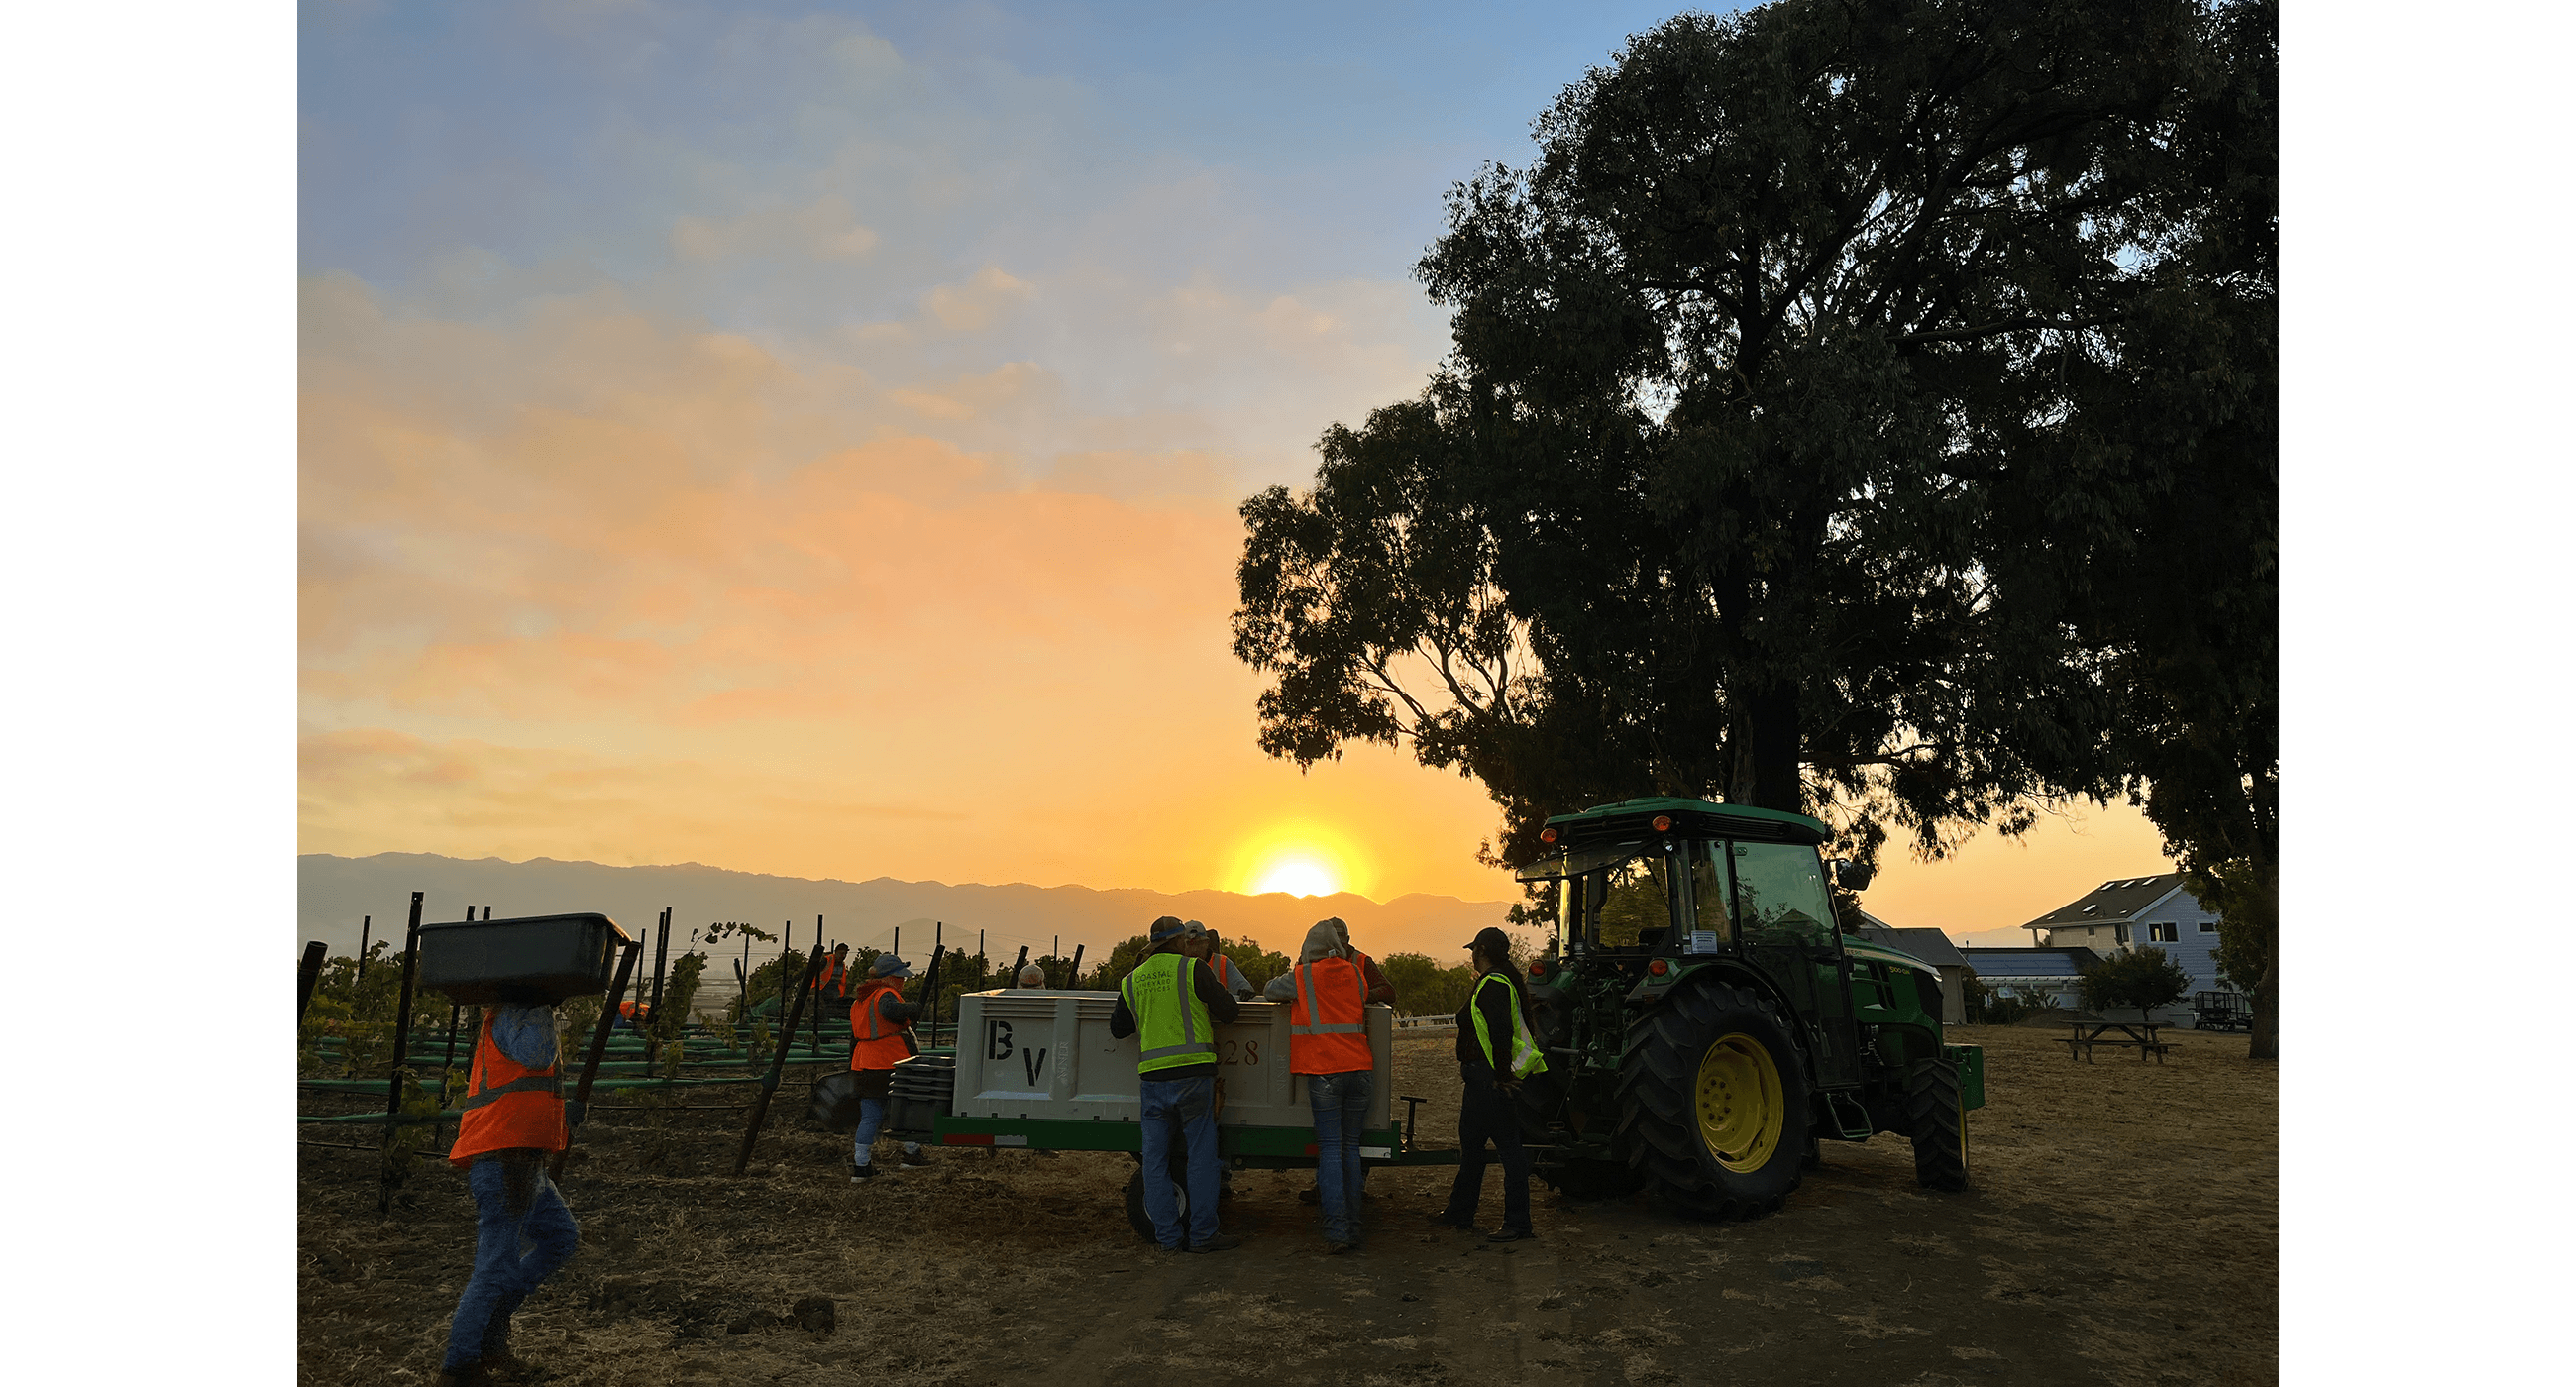 A sunrise over a vineyard crew getting ready to harvest. The silhouette of an oak tree is shown in the foreground.